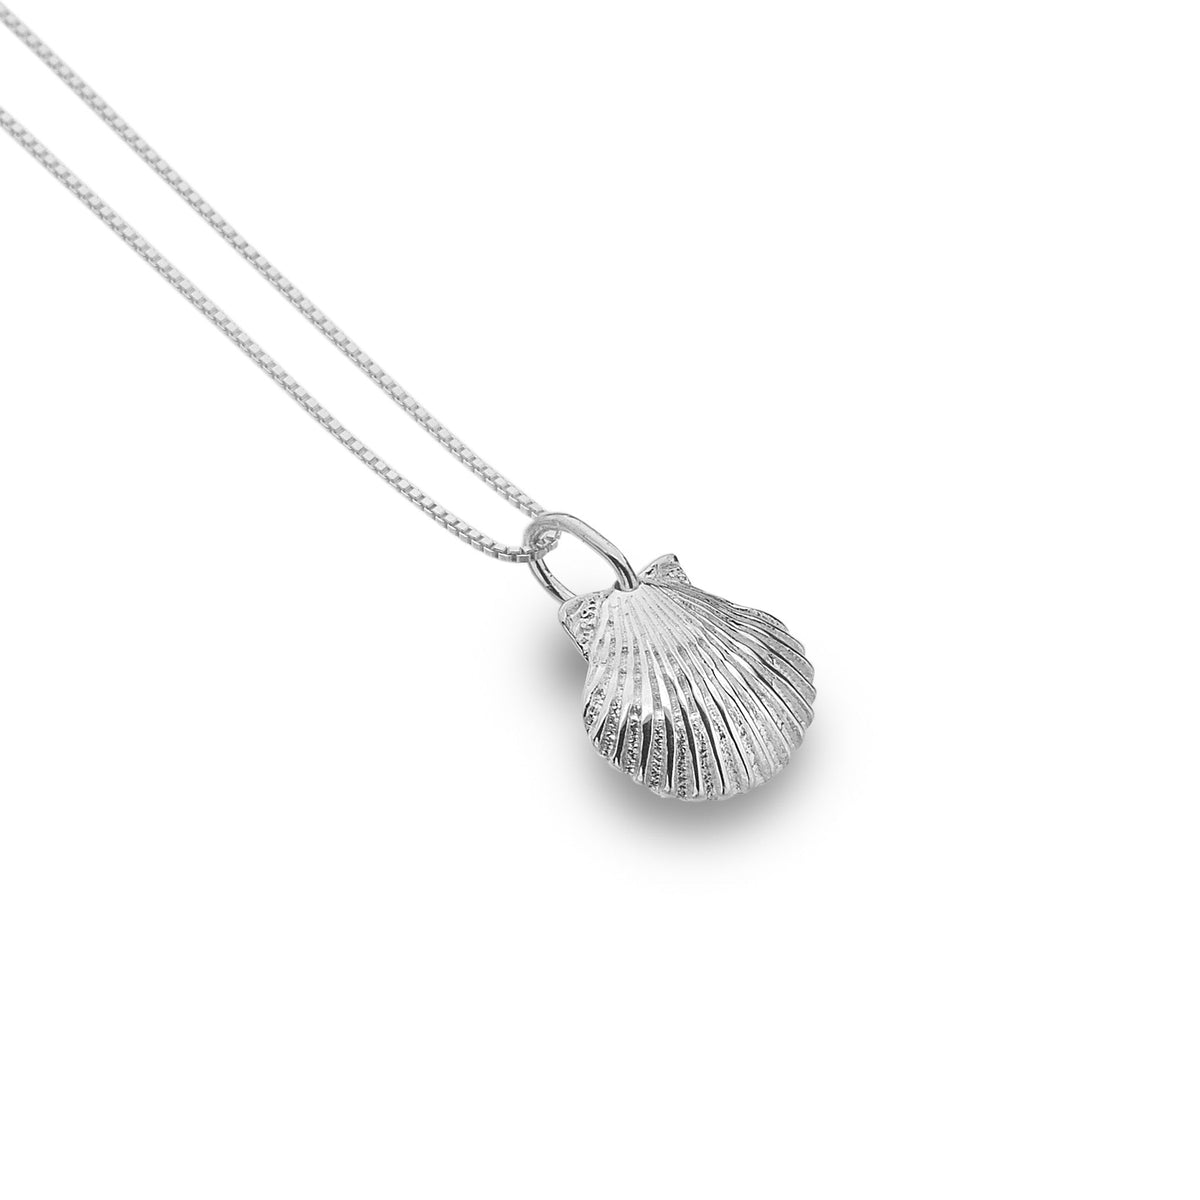 Scallop Shell Pendant Necklace, Sterling Silver, Handcrafted